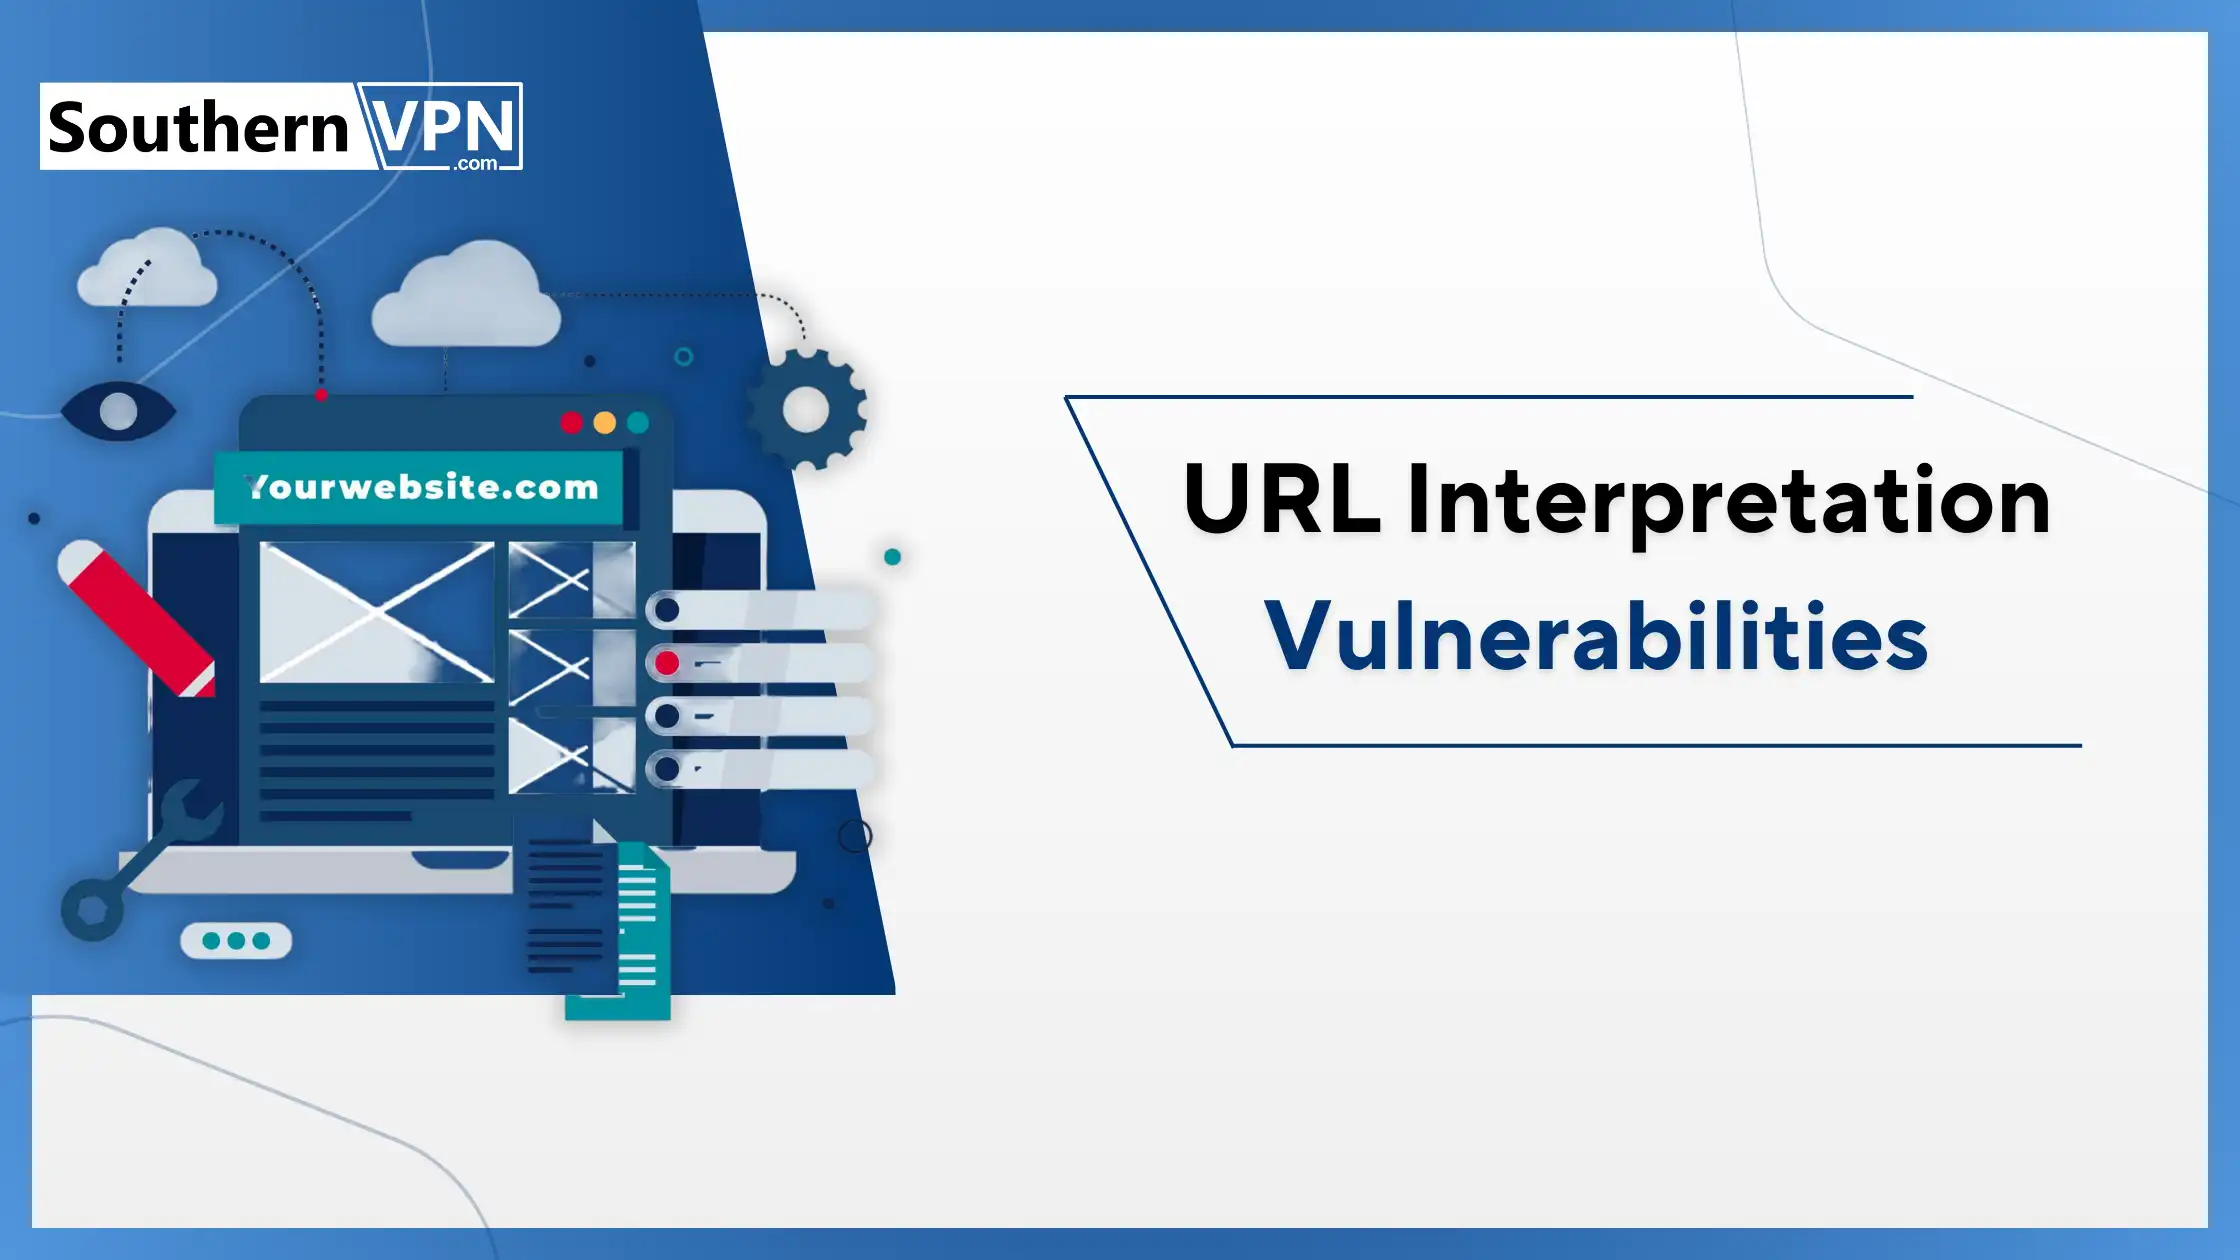 Illustration showing a website with various tools and cloud icons, representing URL interpretation vulnerabilities, highlighting types of cyber attacks.